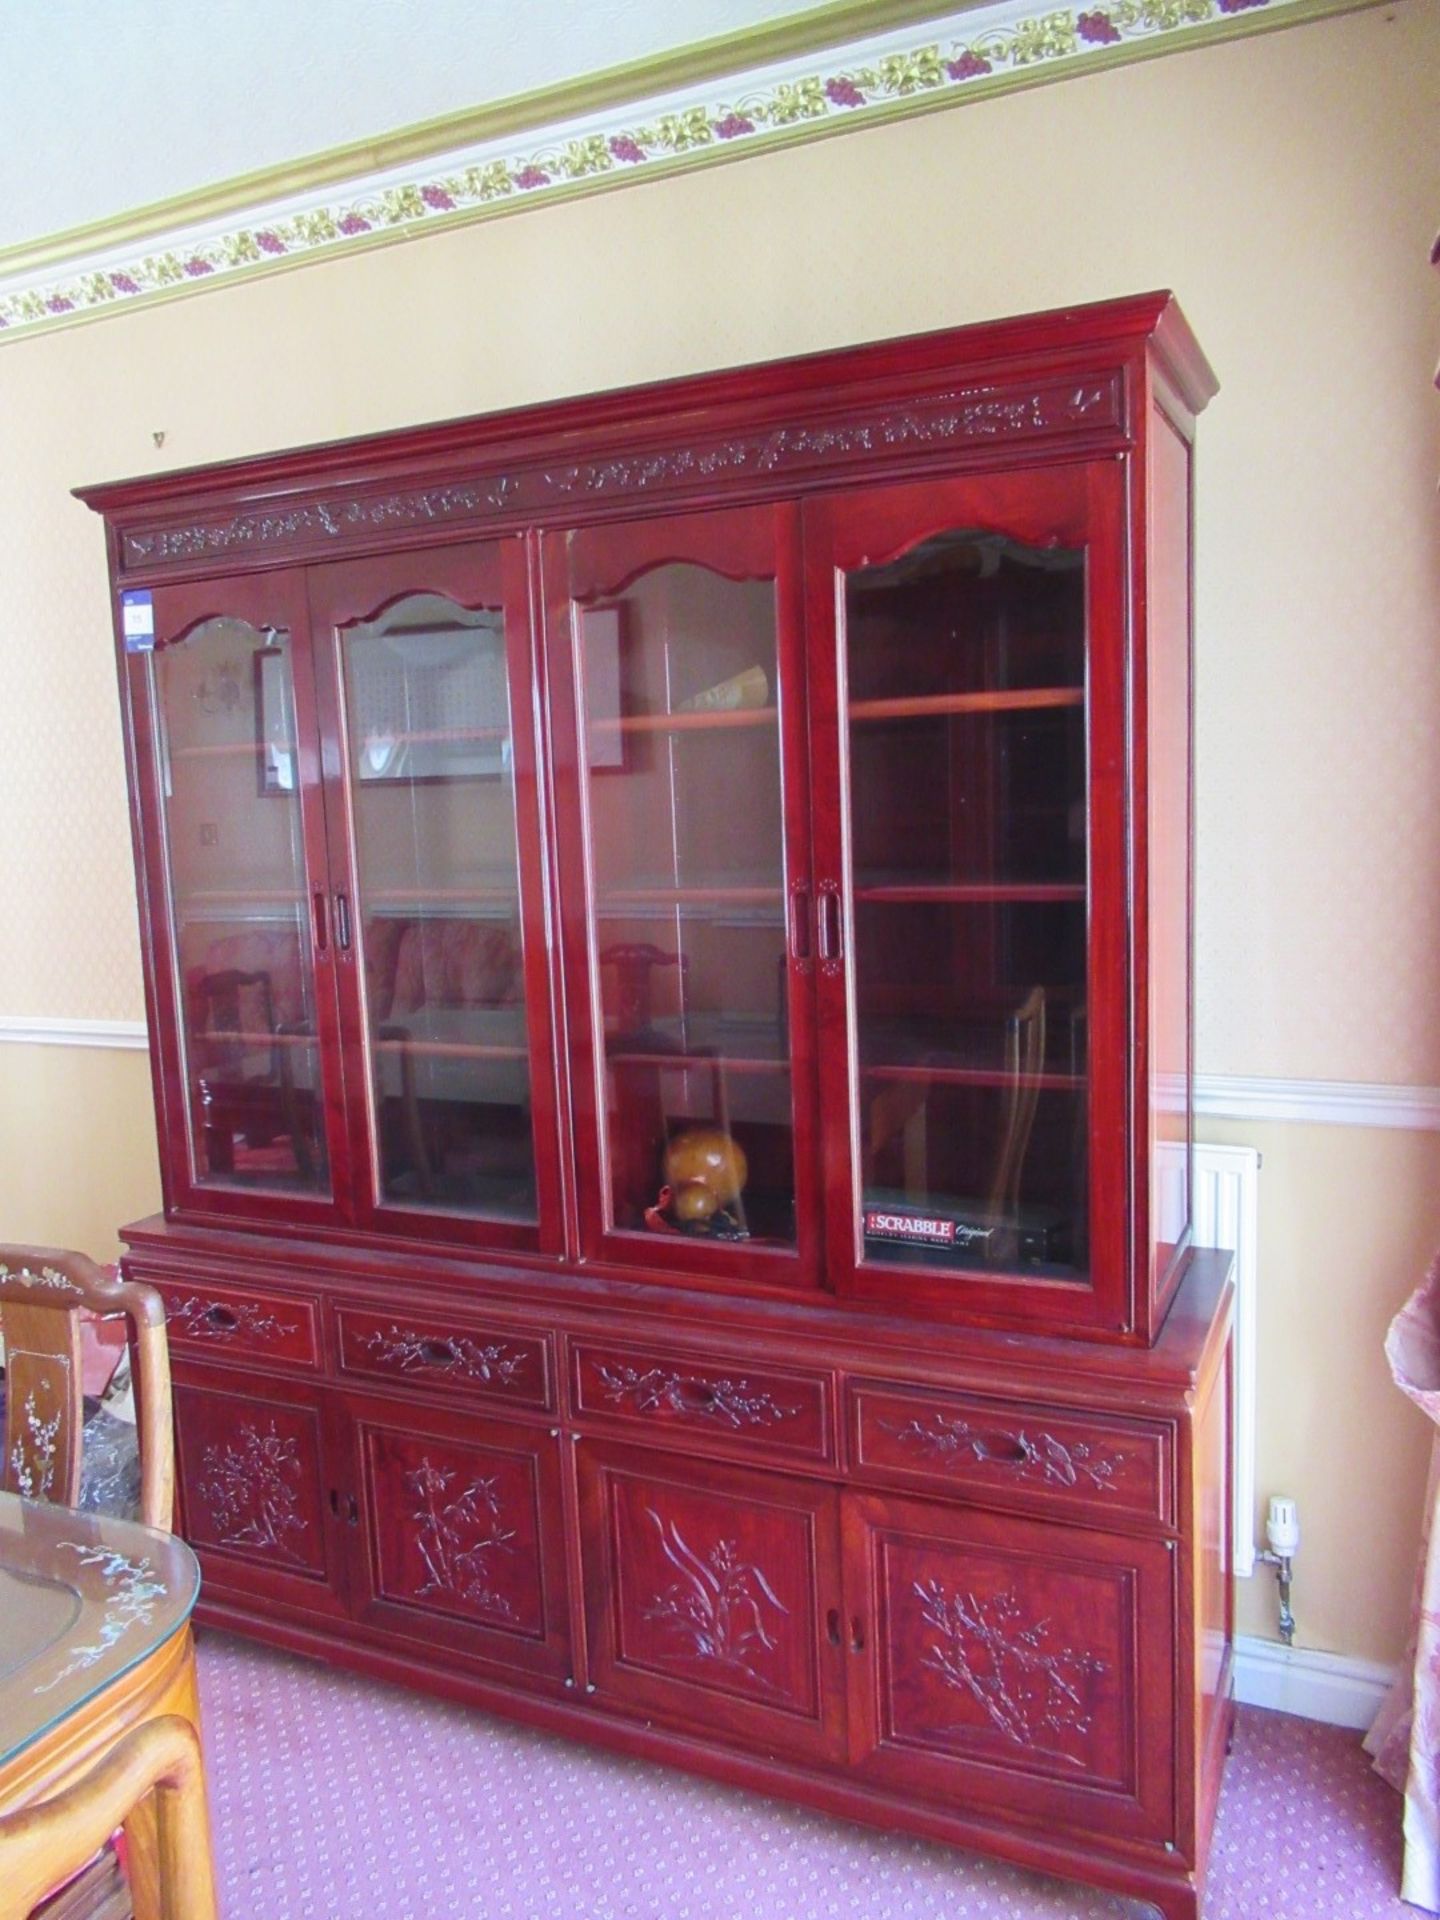 Rosewood Effect Oriental Themed Multi Cupboard / Drawer Display Cabinet 2060x1820x480mm